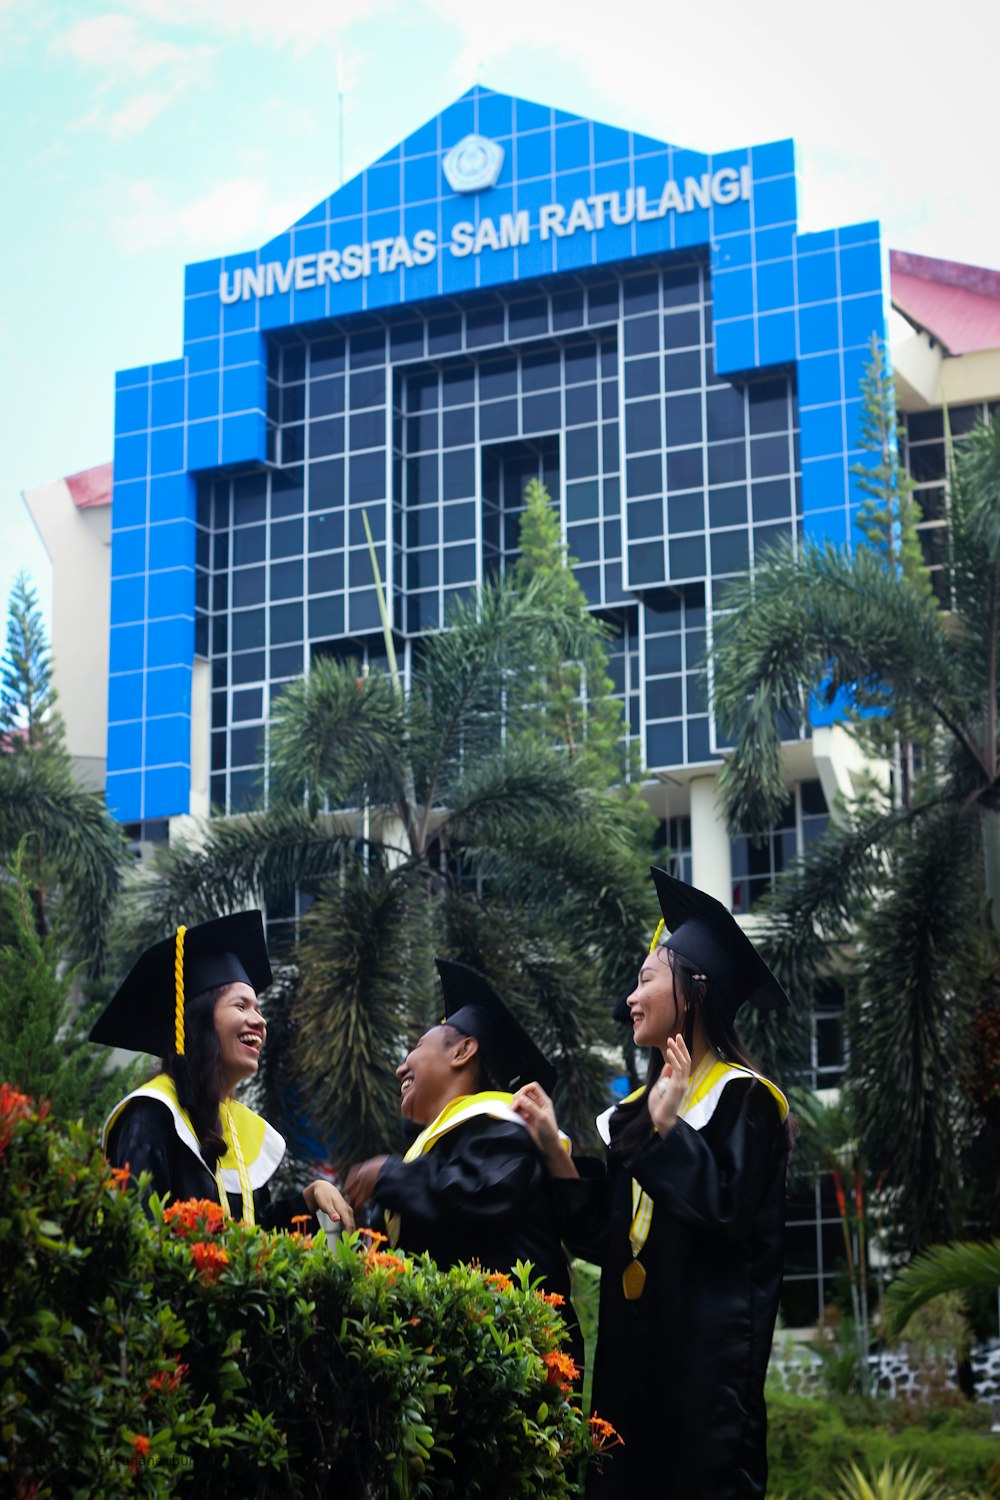 people wearing academic dress standing near blue building during daytime